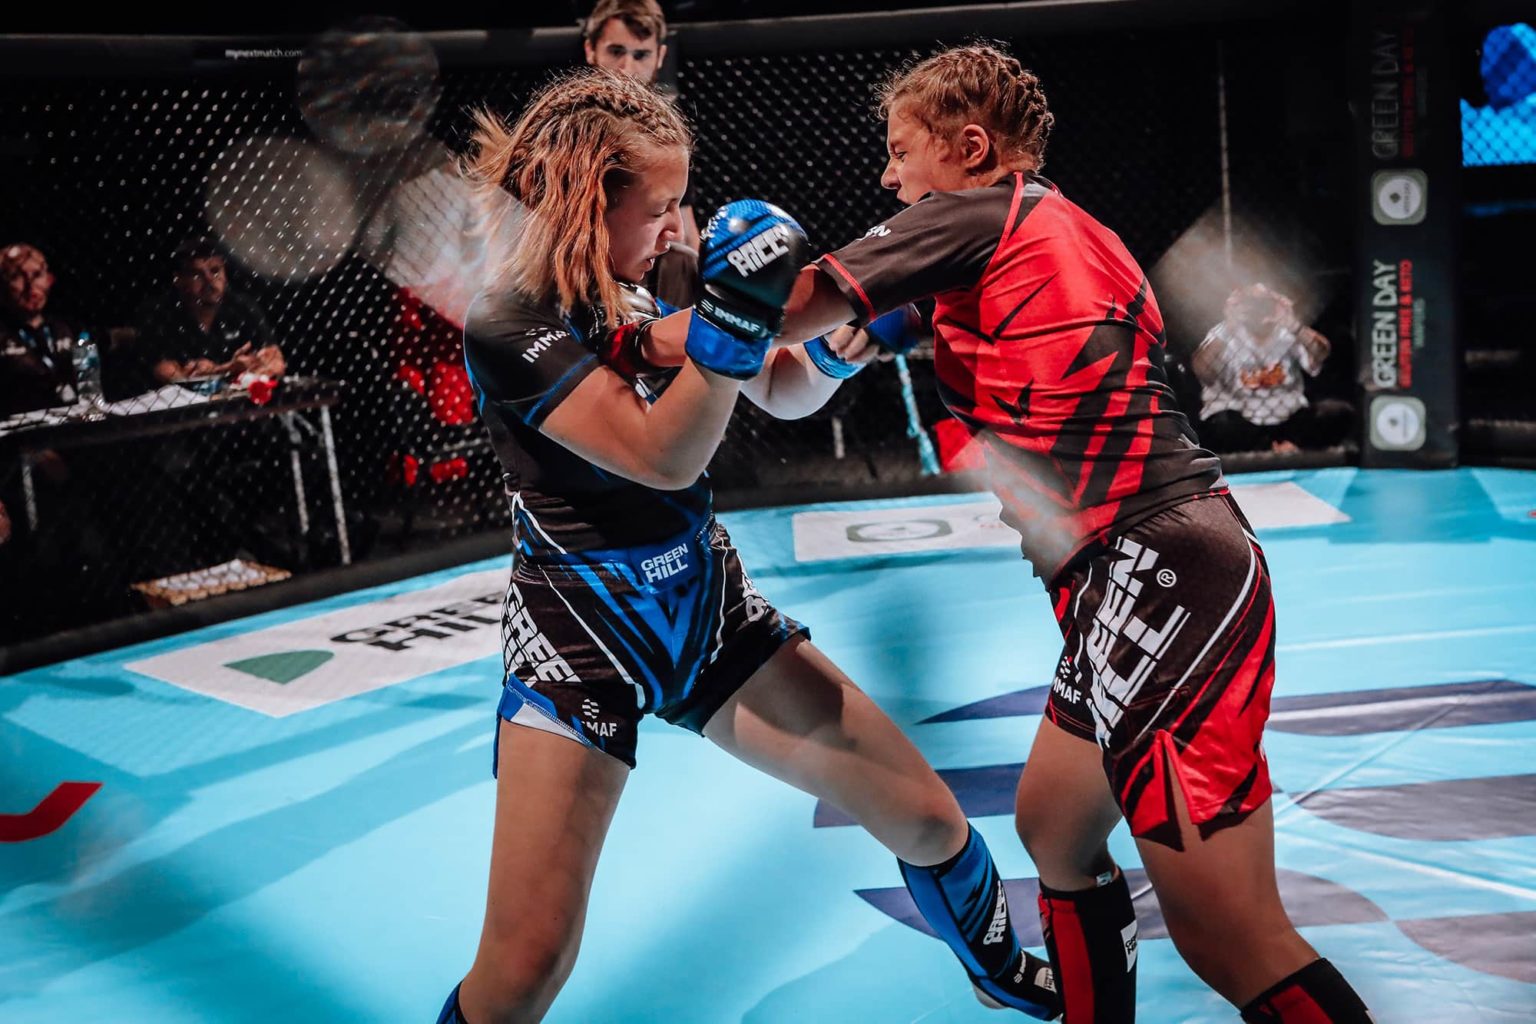 Us Mma Federation Placed Into Special Measures Xtreme Kickboxing